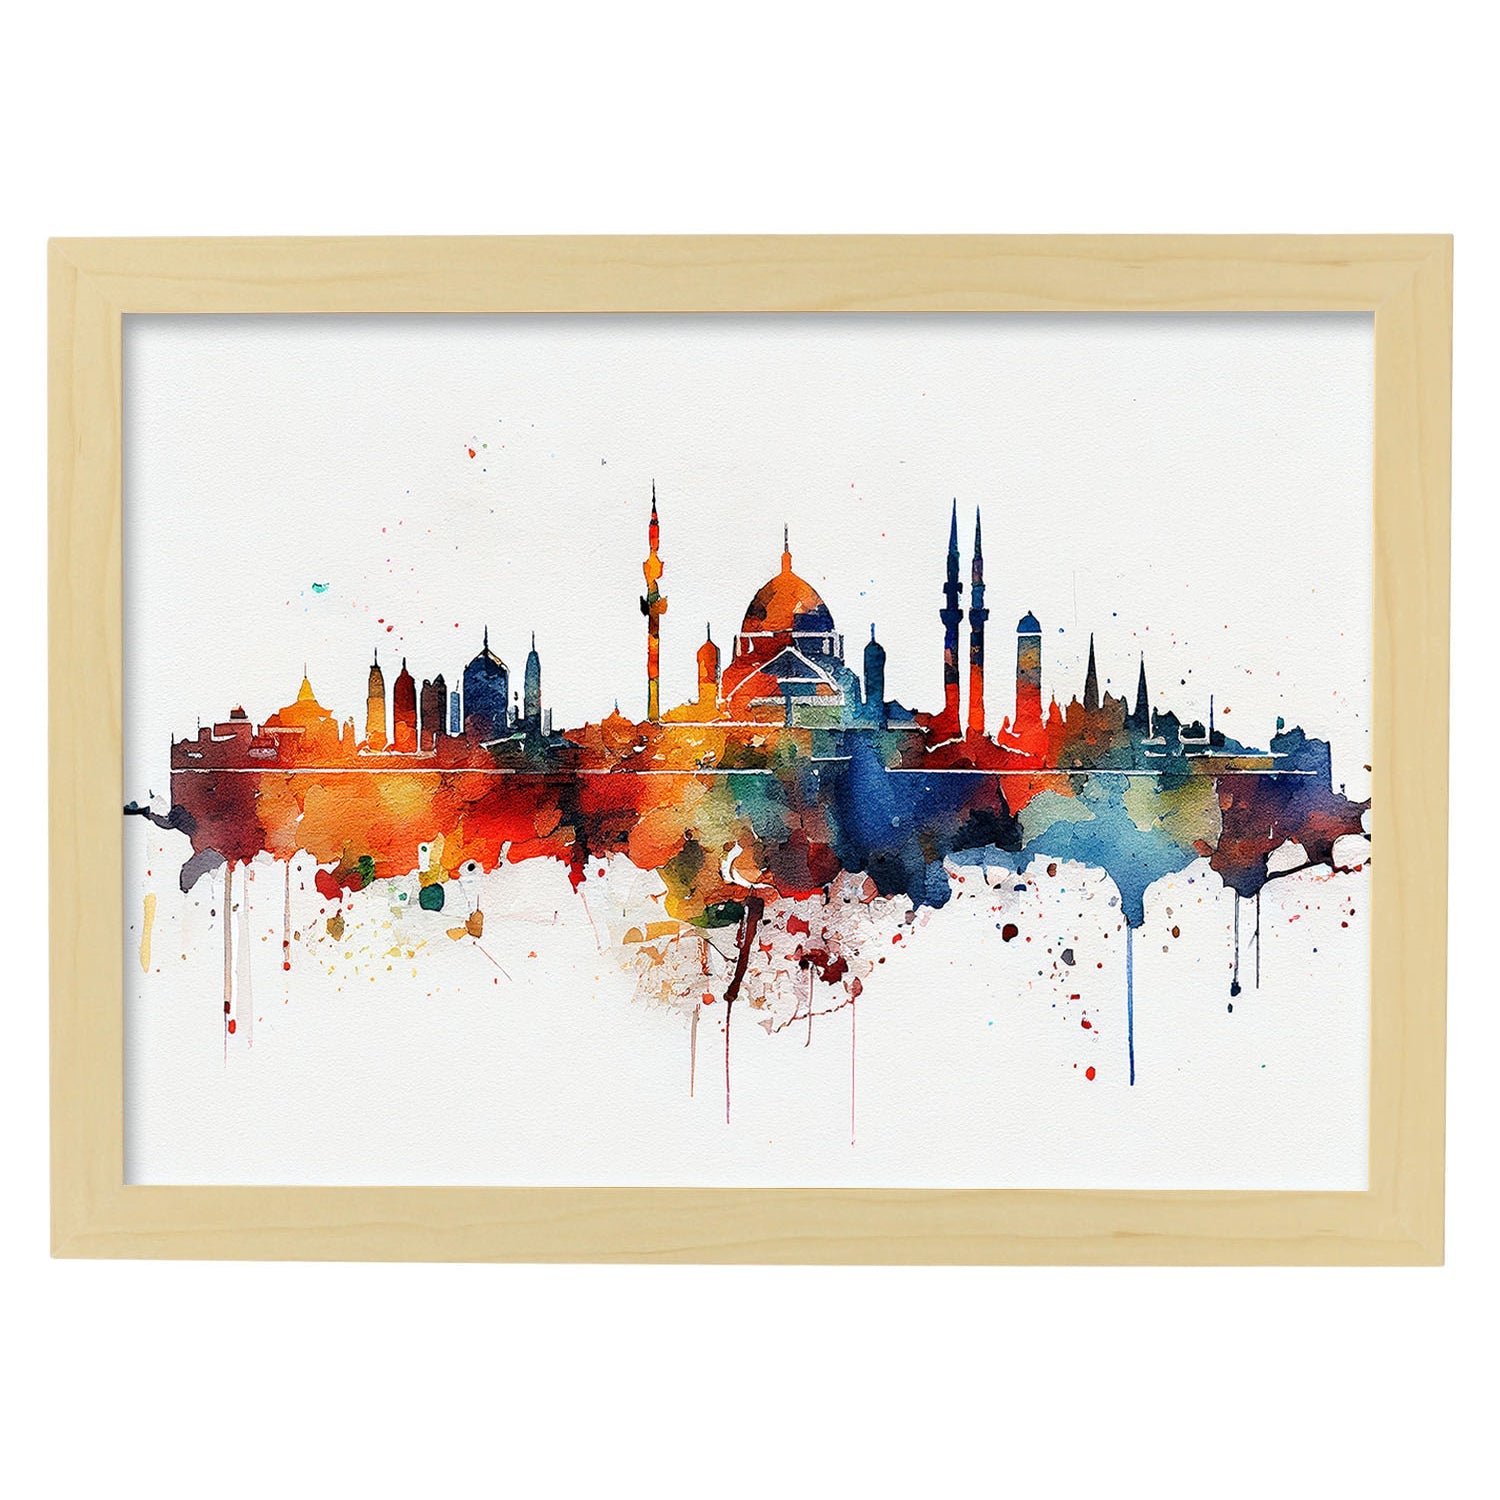 Nacnic watercolor of a skyline of the city of Istanbul_3. Aesthetic Wall Art Prints for Bedroom or Living Room Design.-Artwork-Nacnic-A4-Marco Madera Clara-Nacnic Estudio SL